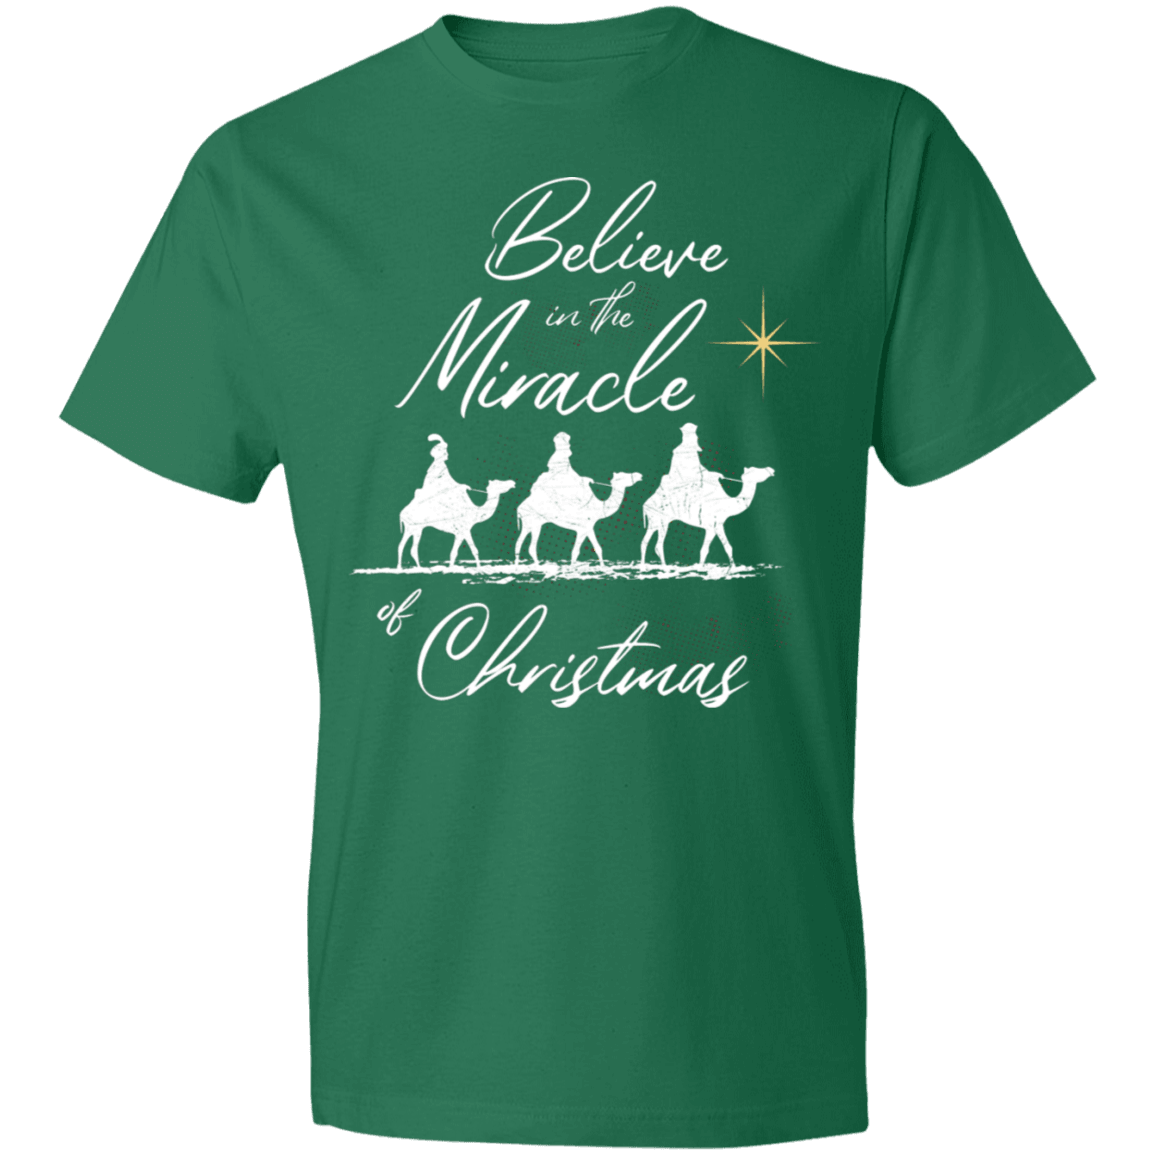 Designs by MyUtopia Shout Out:Believe in the Miracle - Lightweight T-Shirt,Kelly Green / S,Adult Unisex T-Shirt